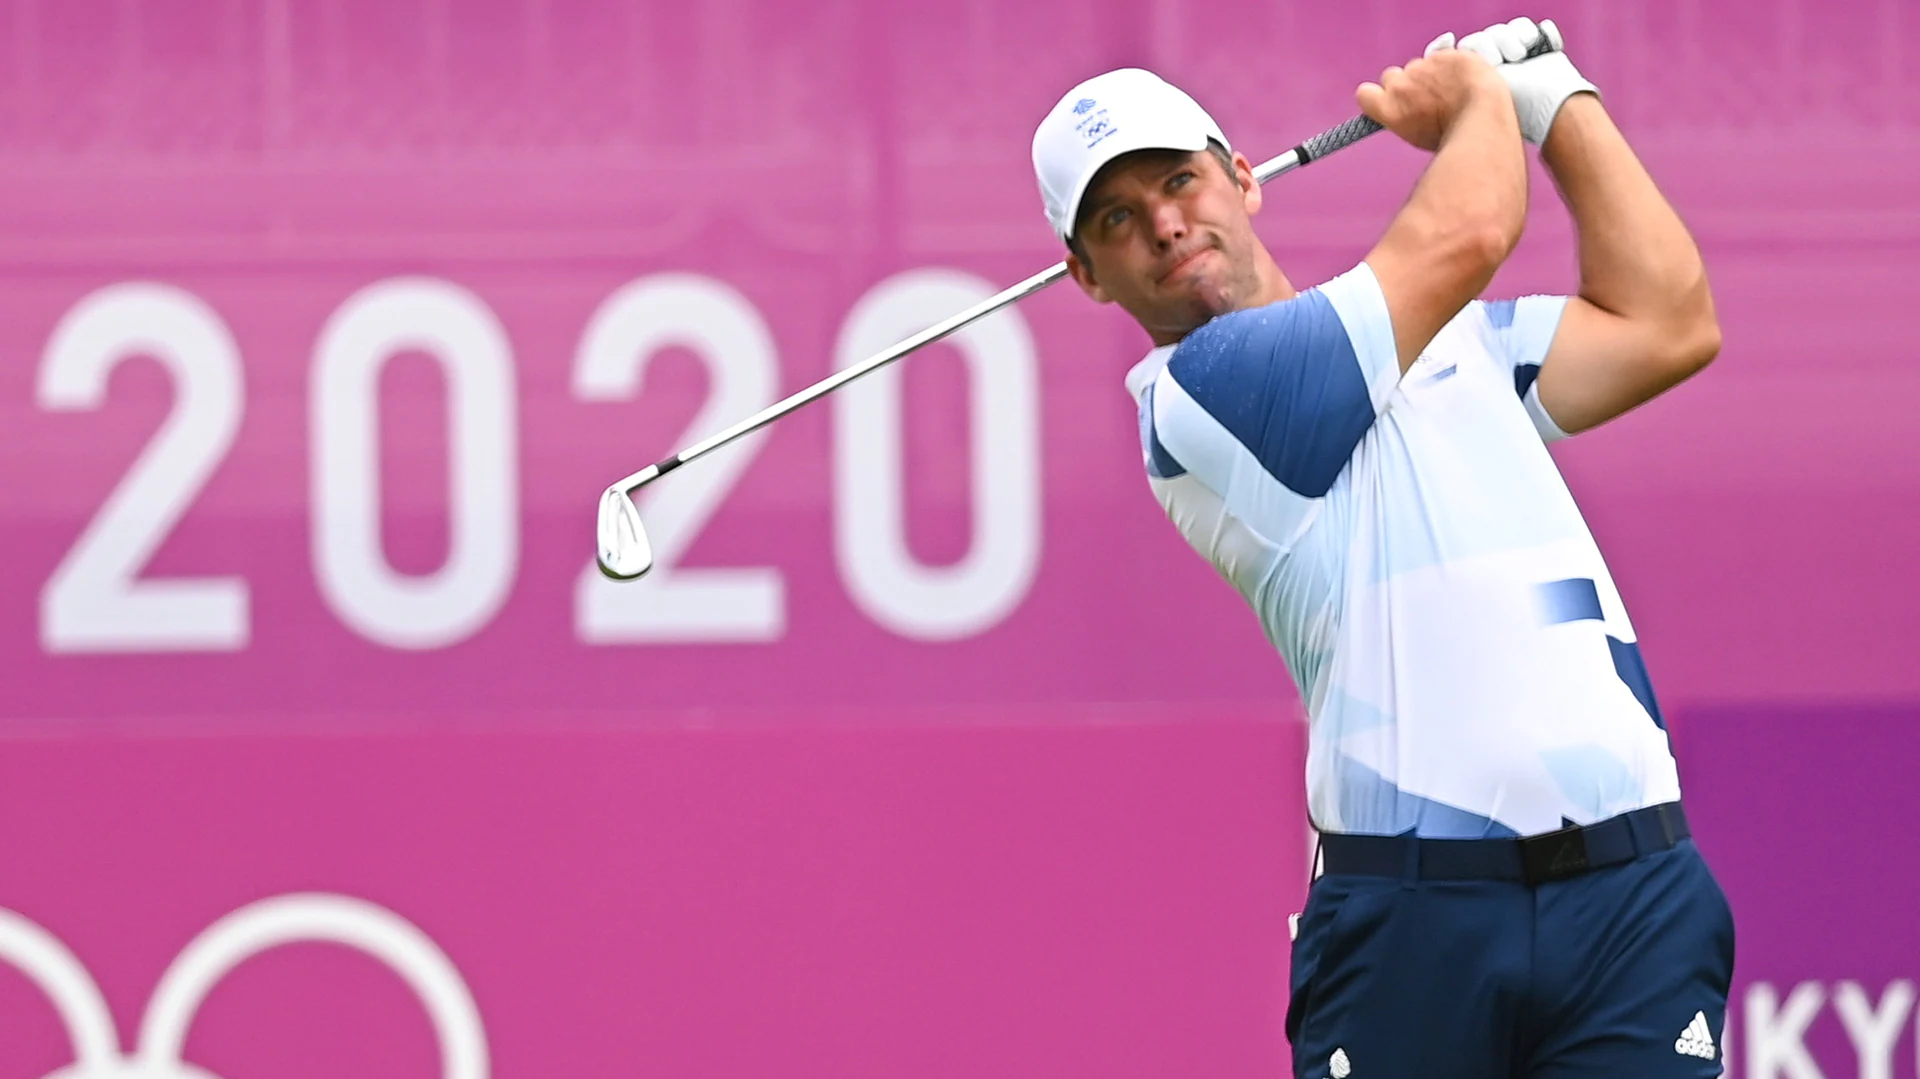 2021 Olympics: Eyeing ‘massive’ moment, Paul Casey going for gold Sunday in Tokyo